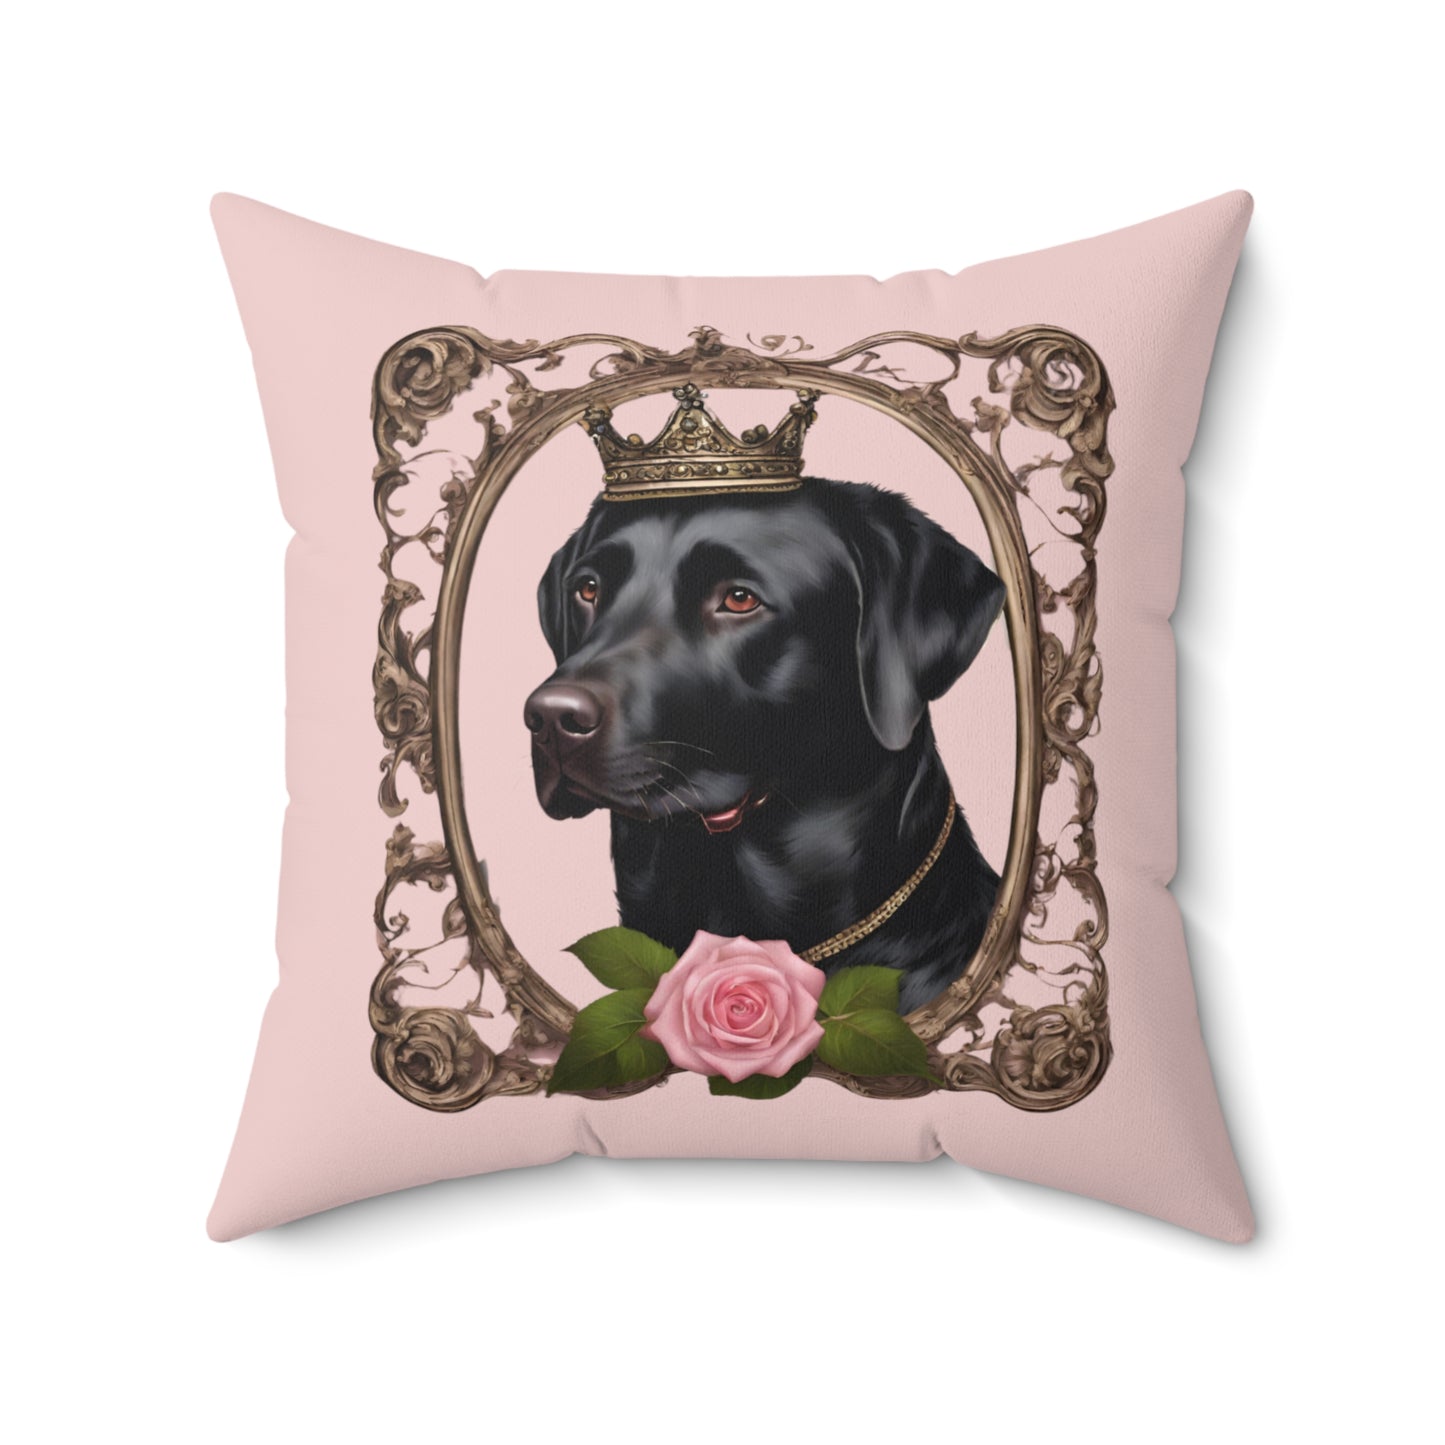 Coquette Black Labrador Rose Princess Double Sided Square Pillow Multiple Sizes